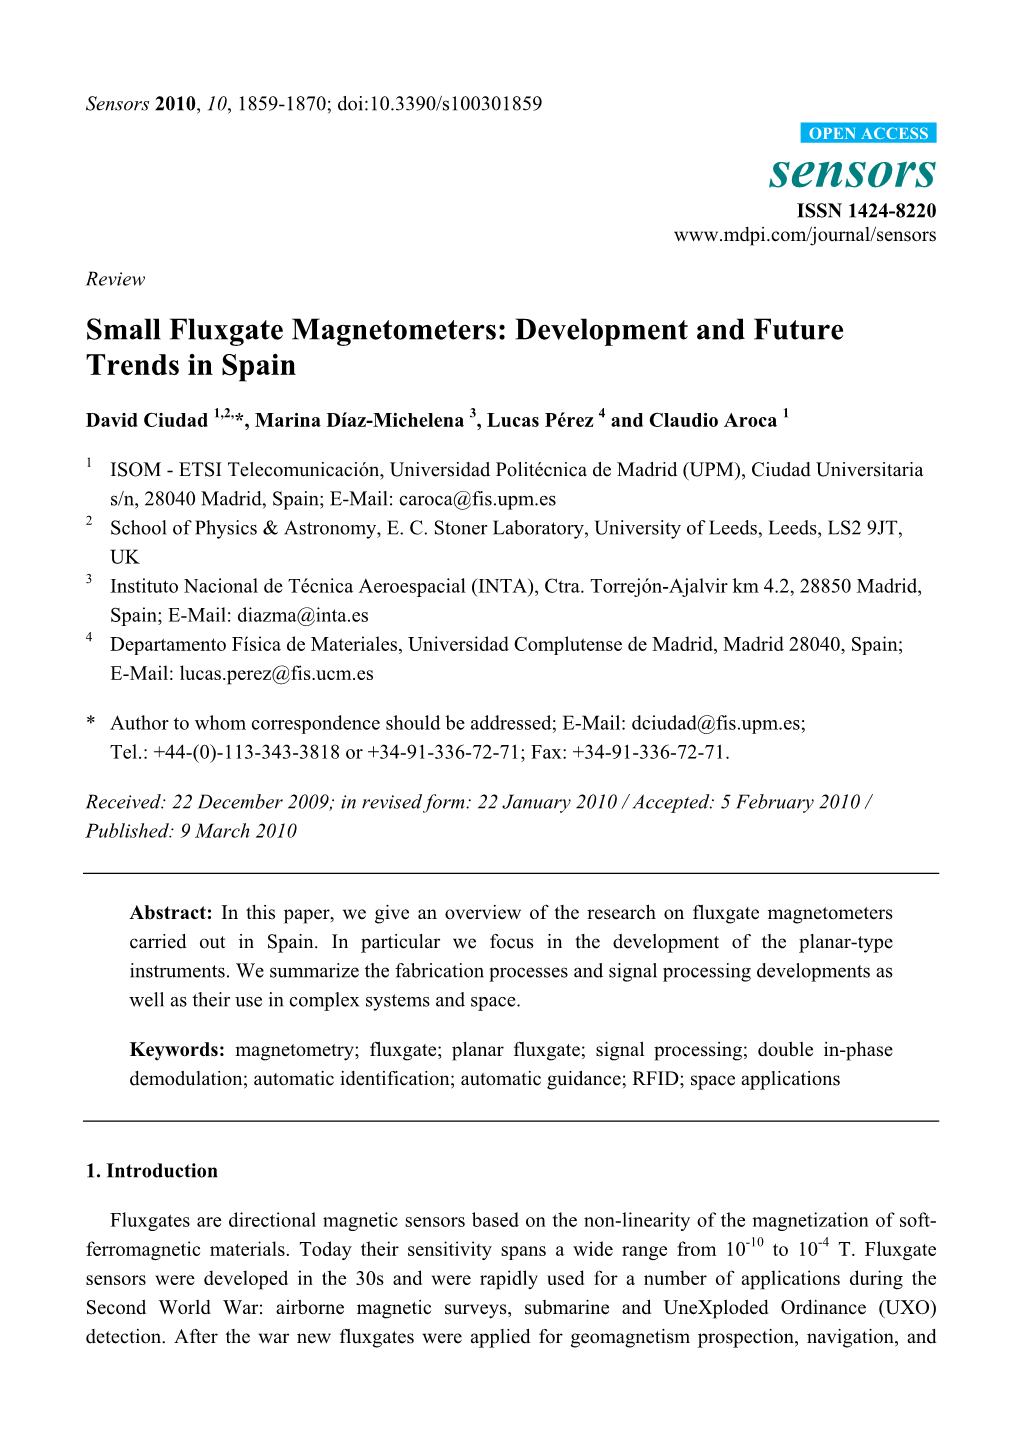 Small Fluxgate Magnetometers: Development and Future Trends in Spain